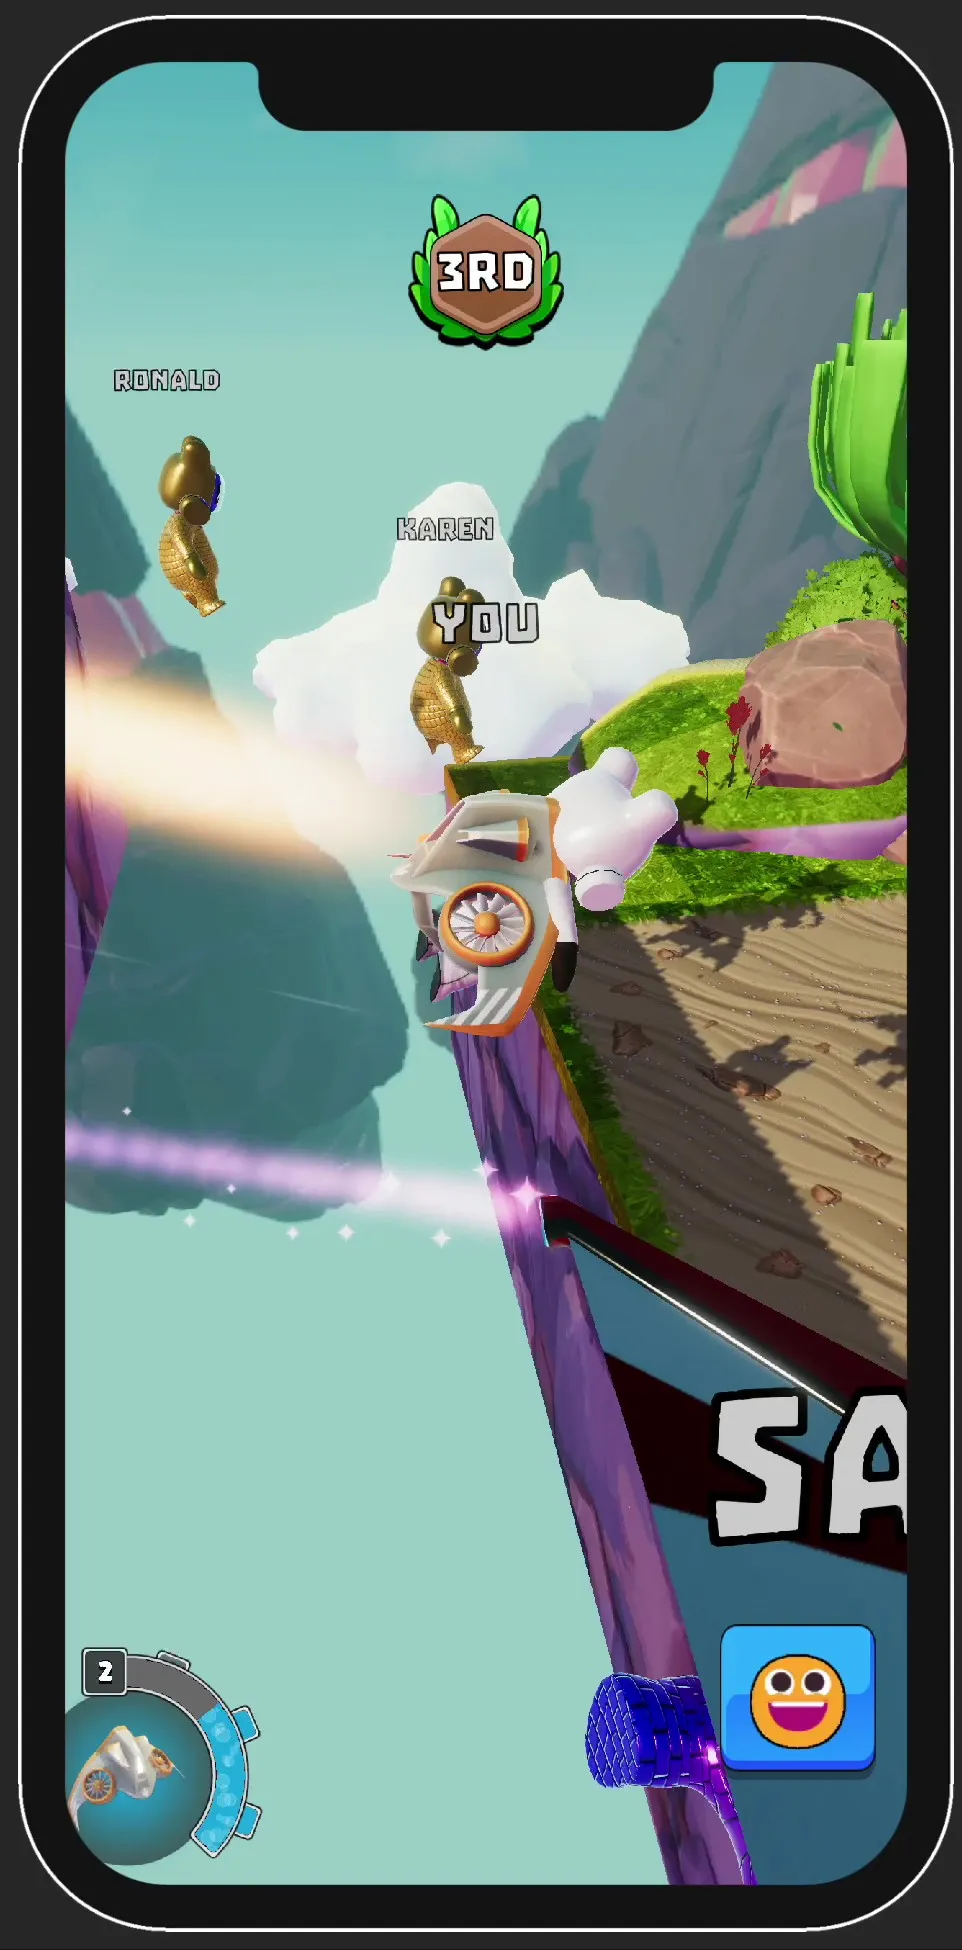 Other players simply jump to the next terrain in AFAR Rush, while the white hero uses the wingsuit gear to fly and gain an advantage in the race over the others